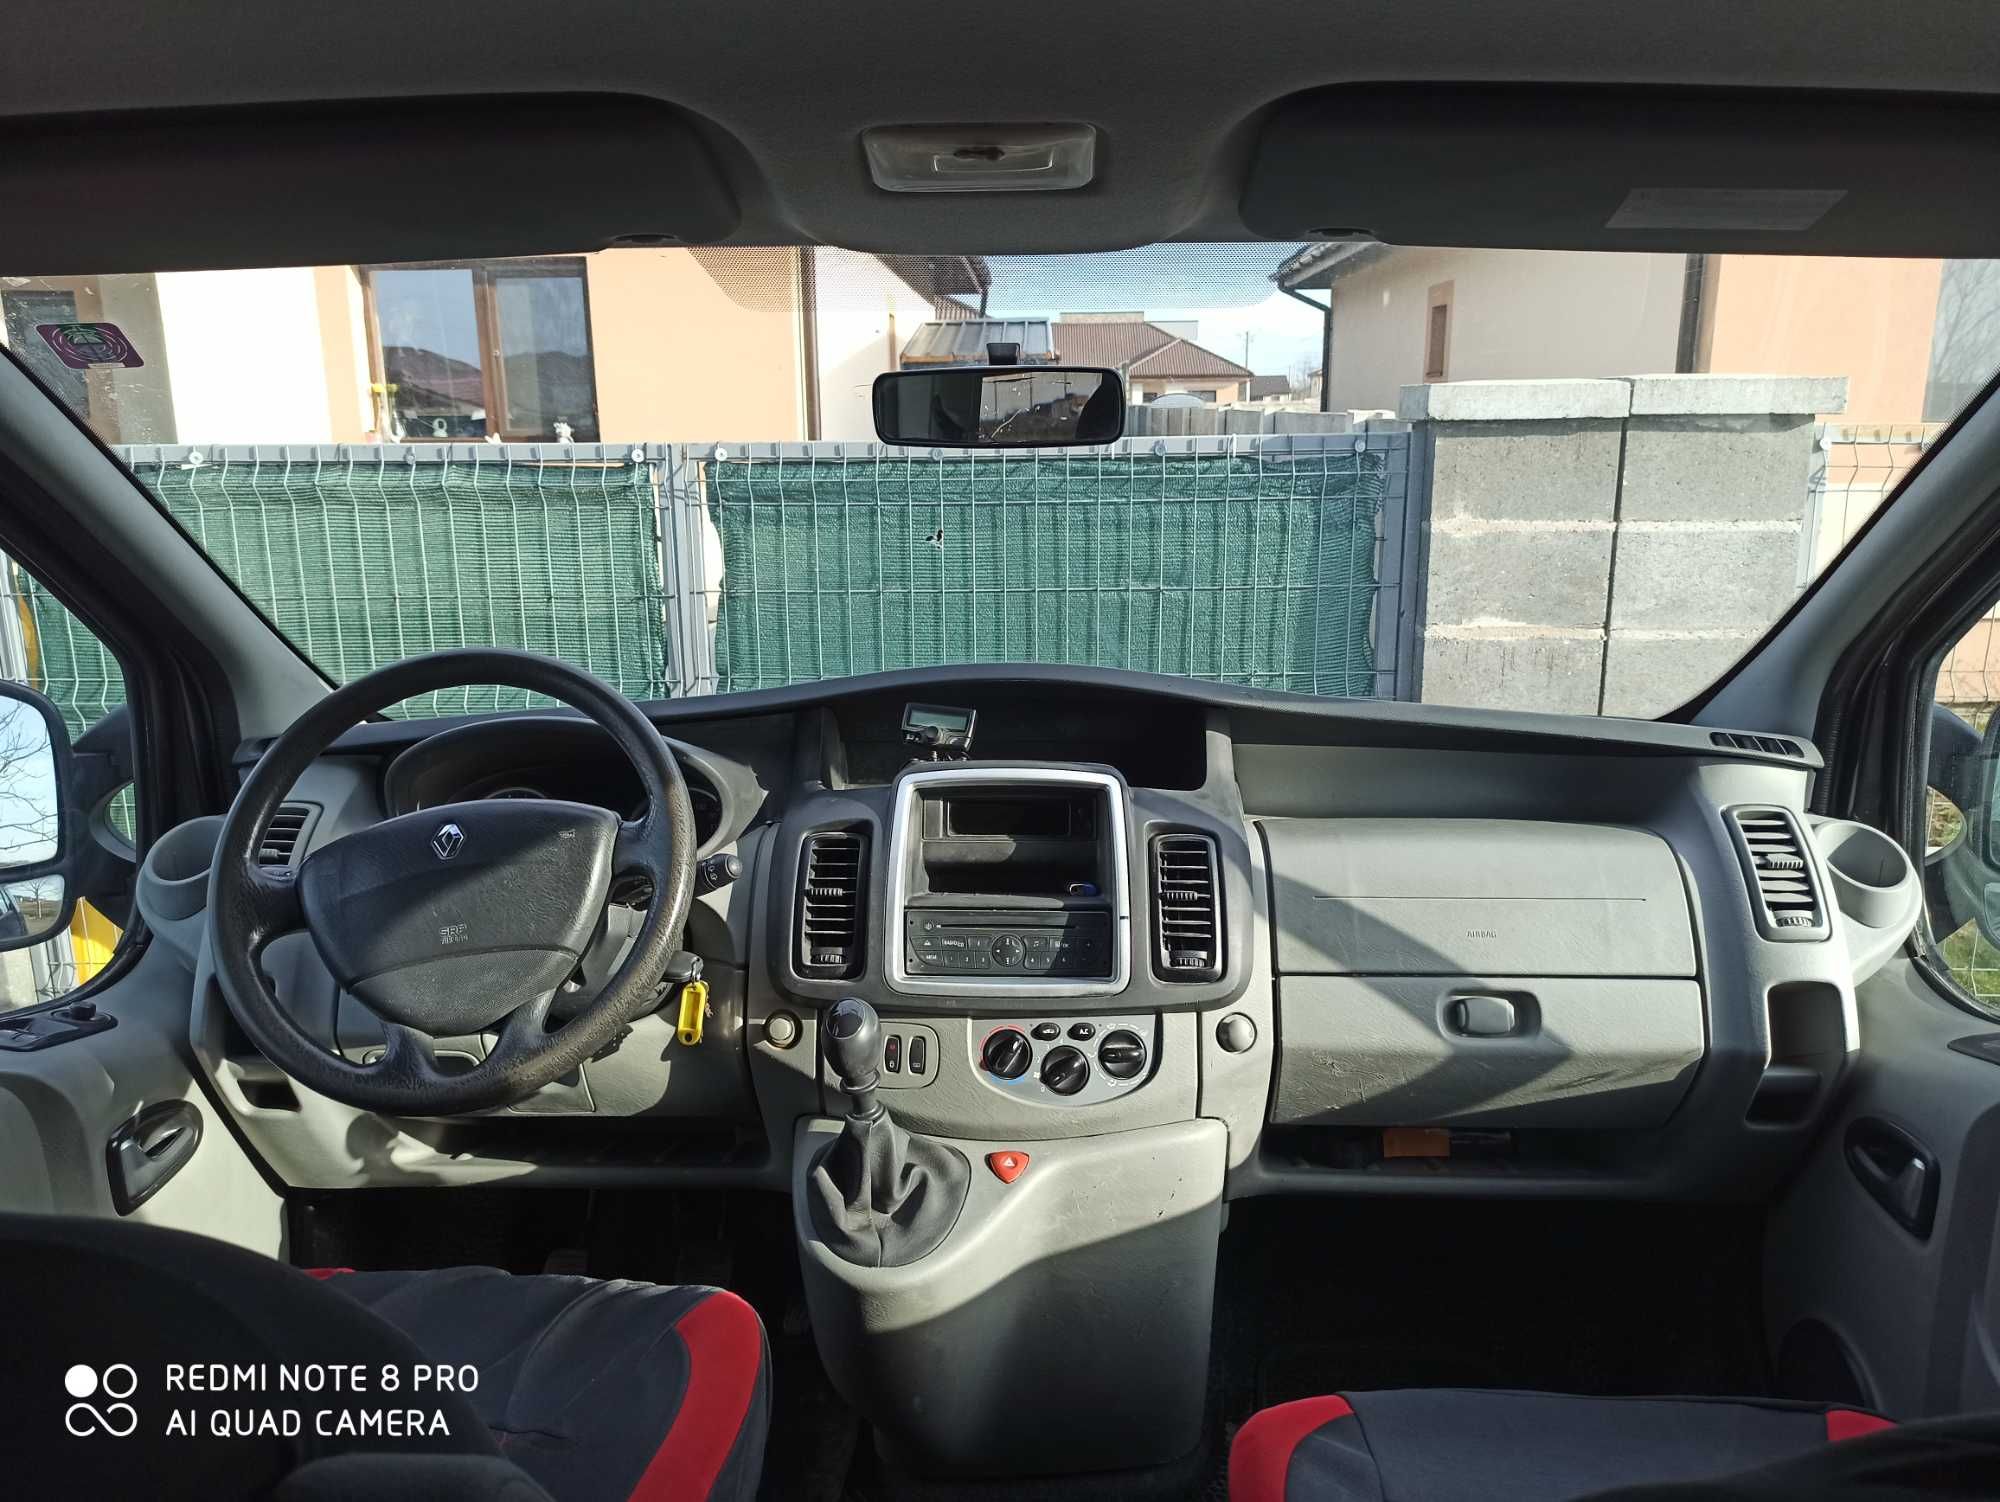 Vand Renault Trafic persoane, 1 an in Romania, motor 2000, an 2011, E5